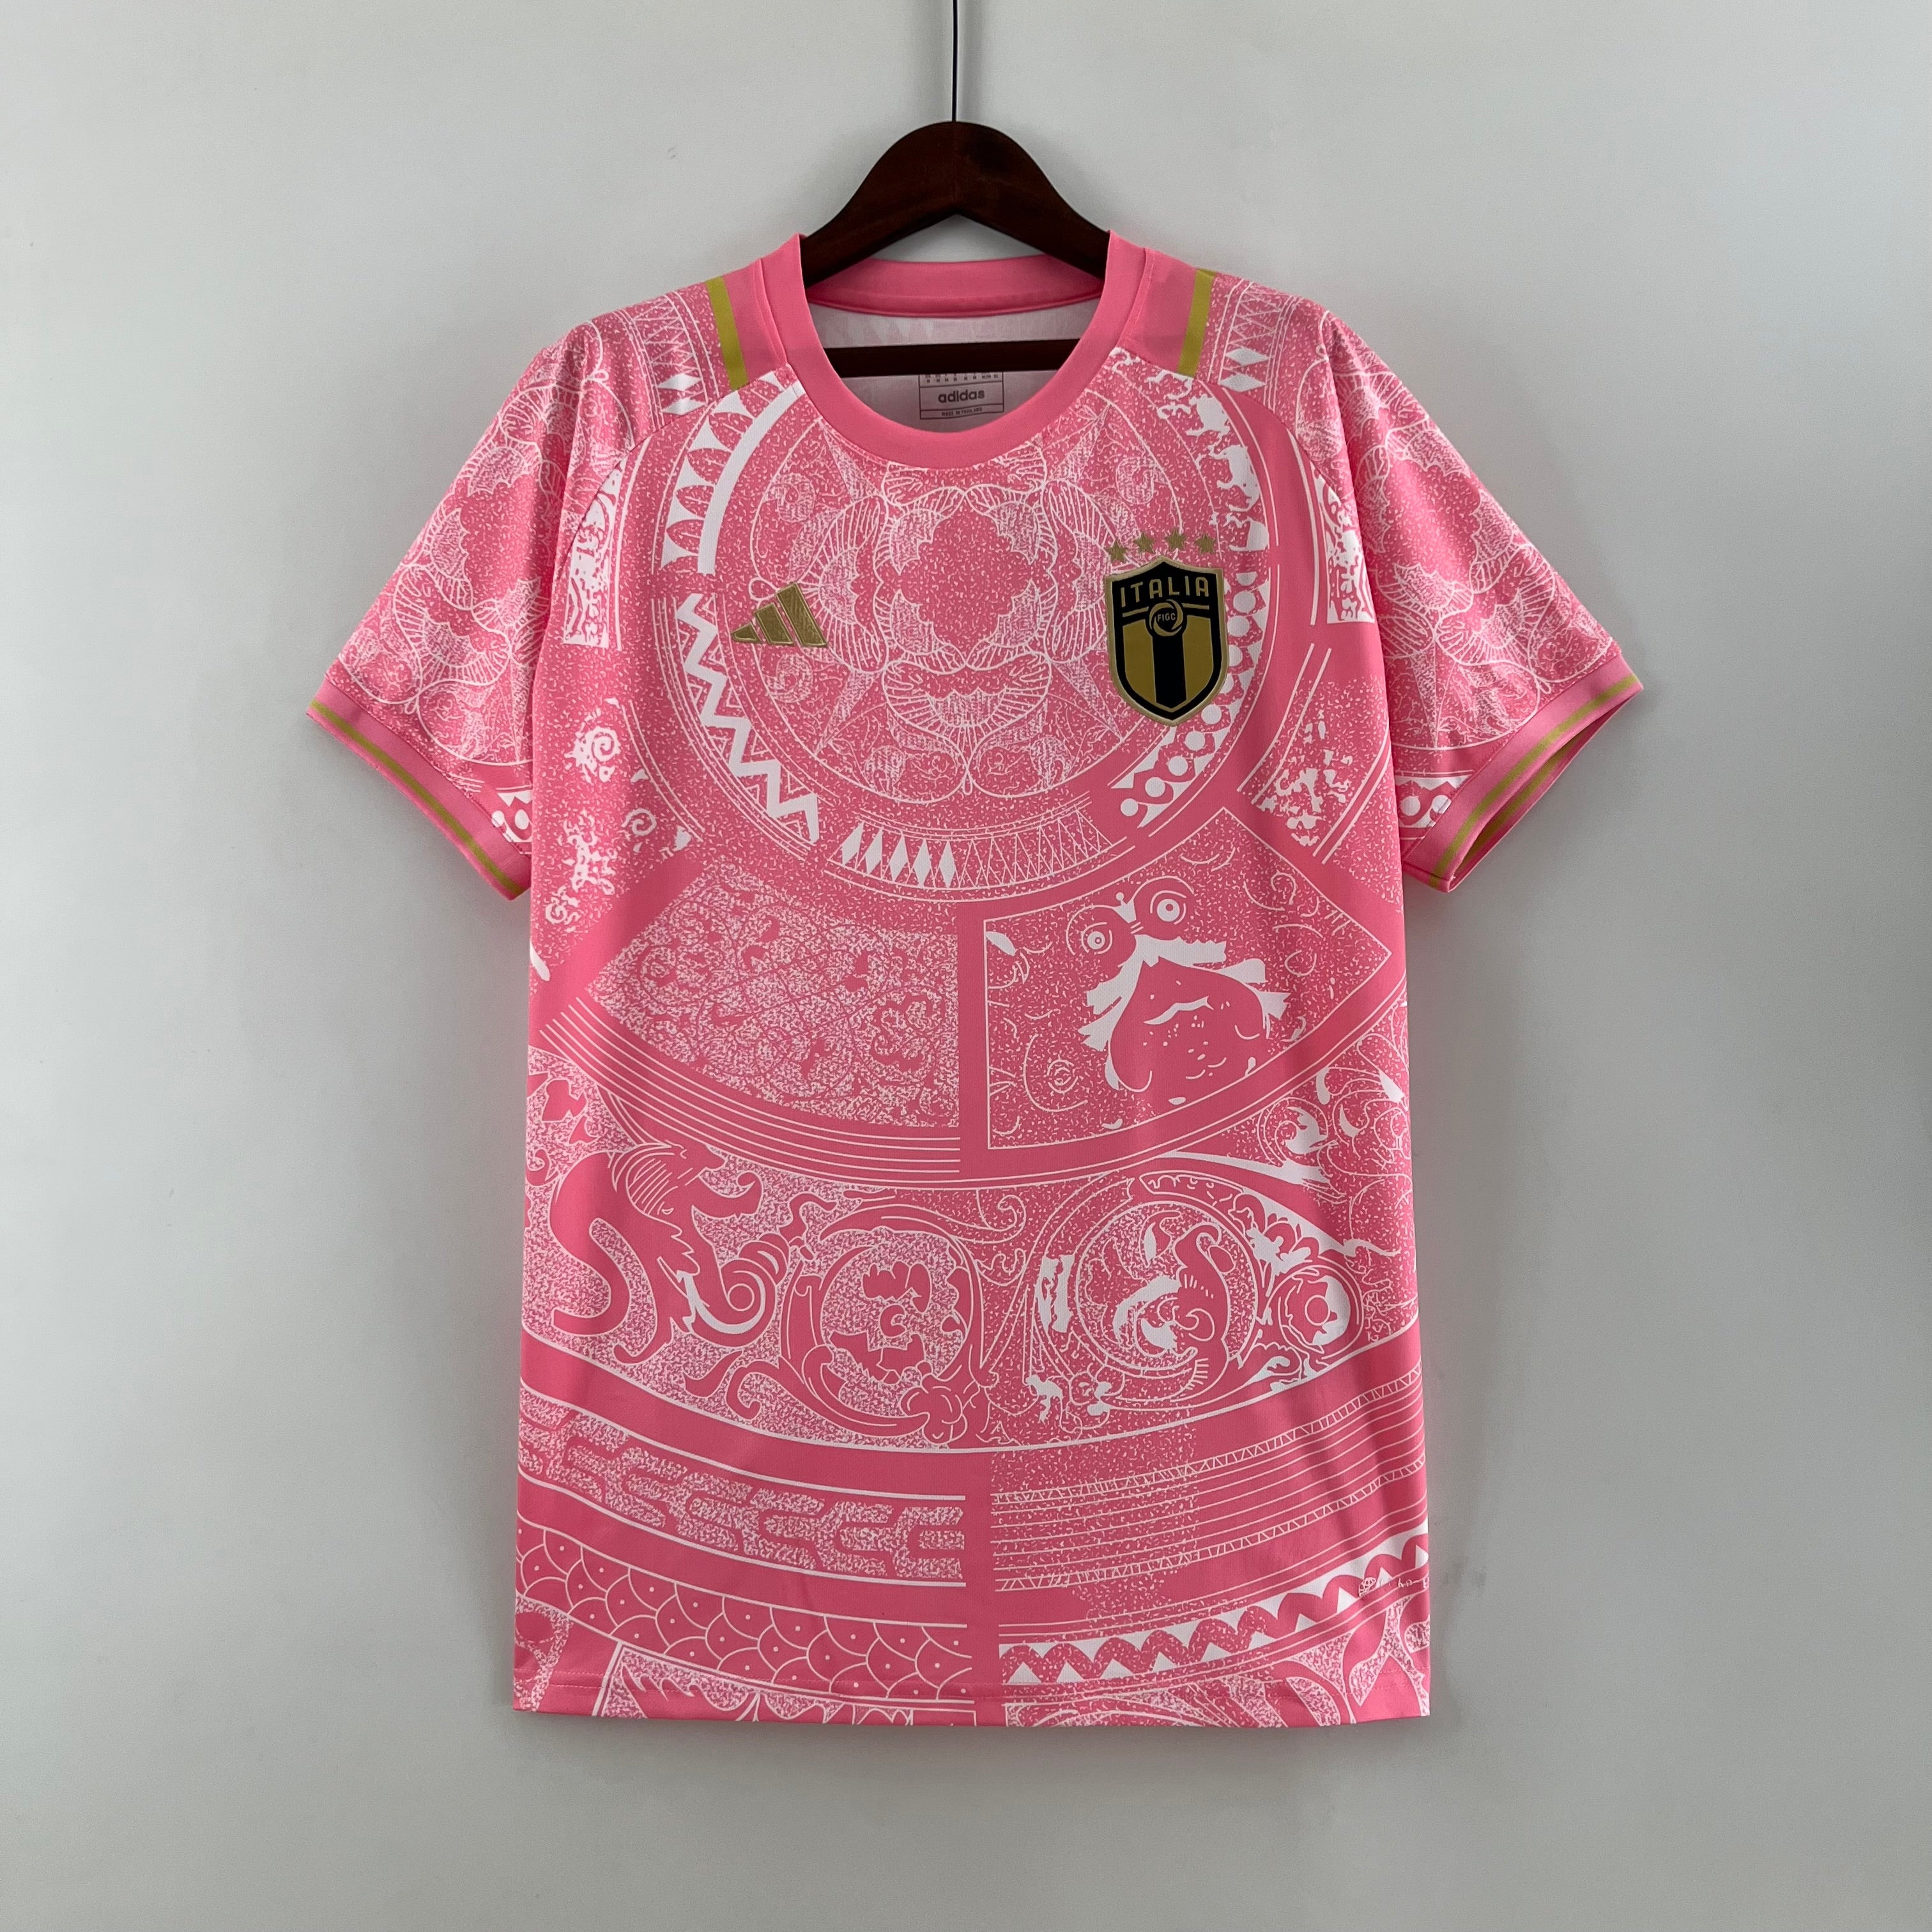 Italy Special Edition Pink Kit